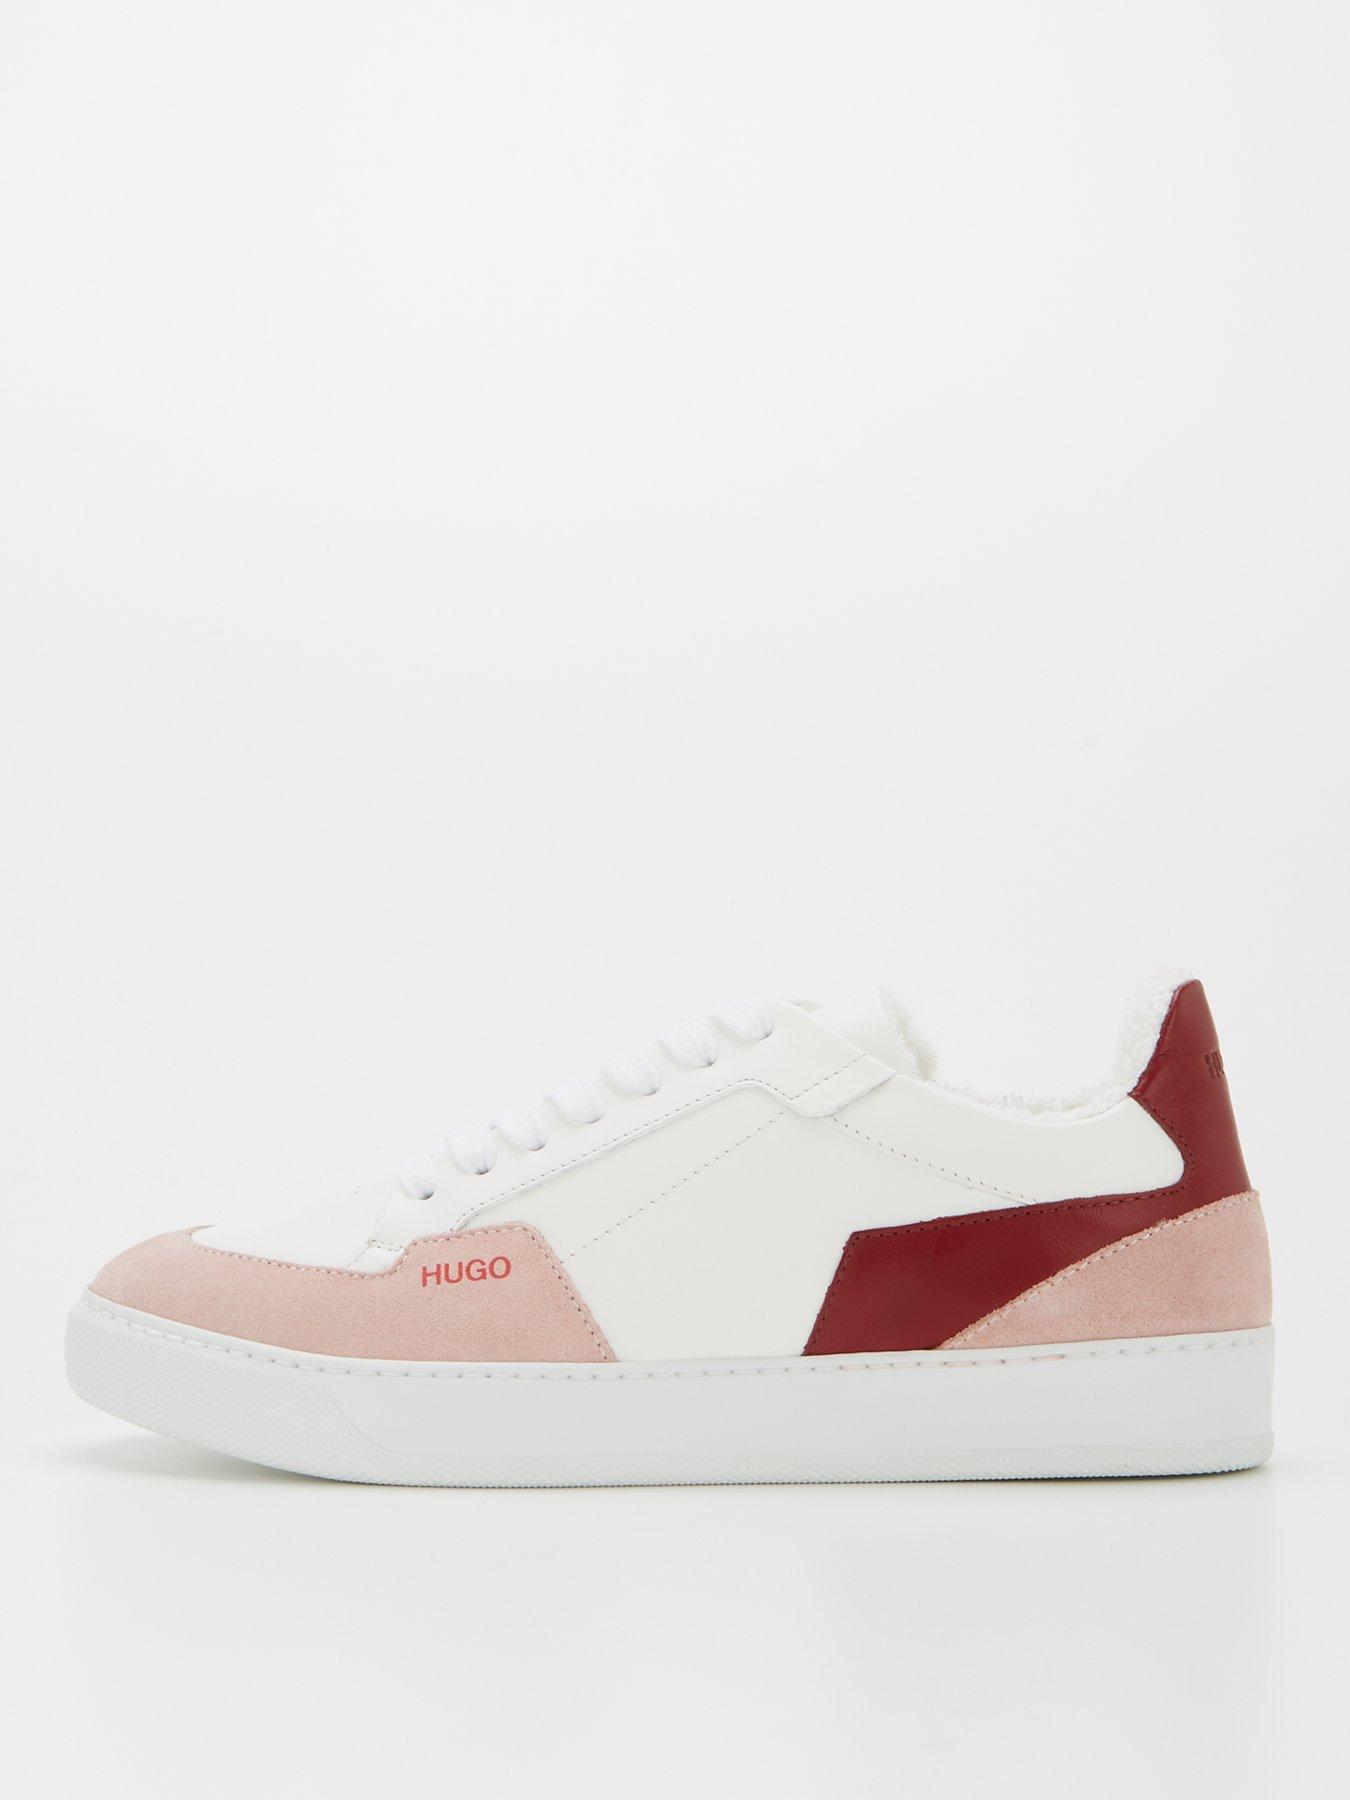  Vera Lace Up Leather Sneaker - White